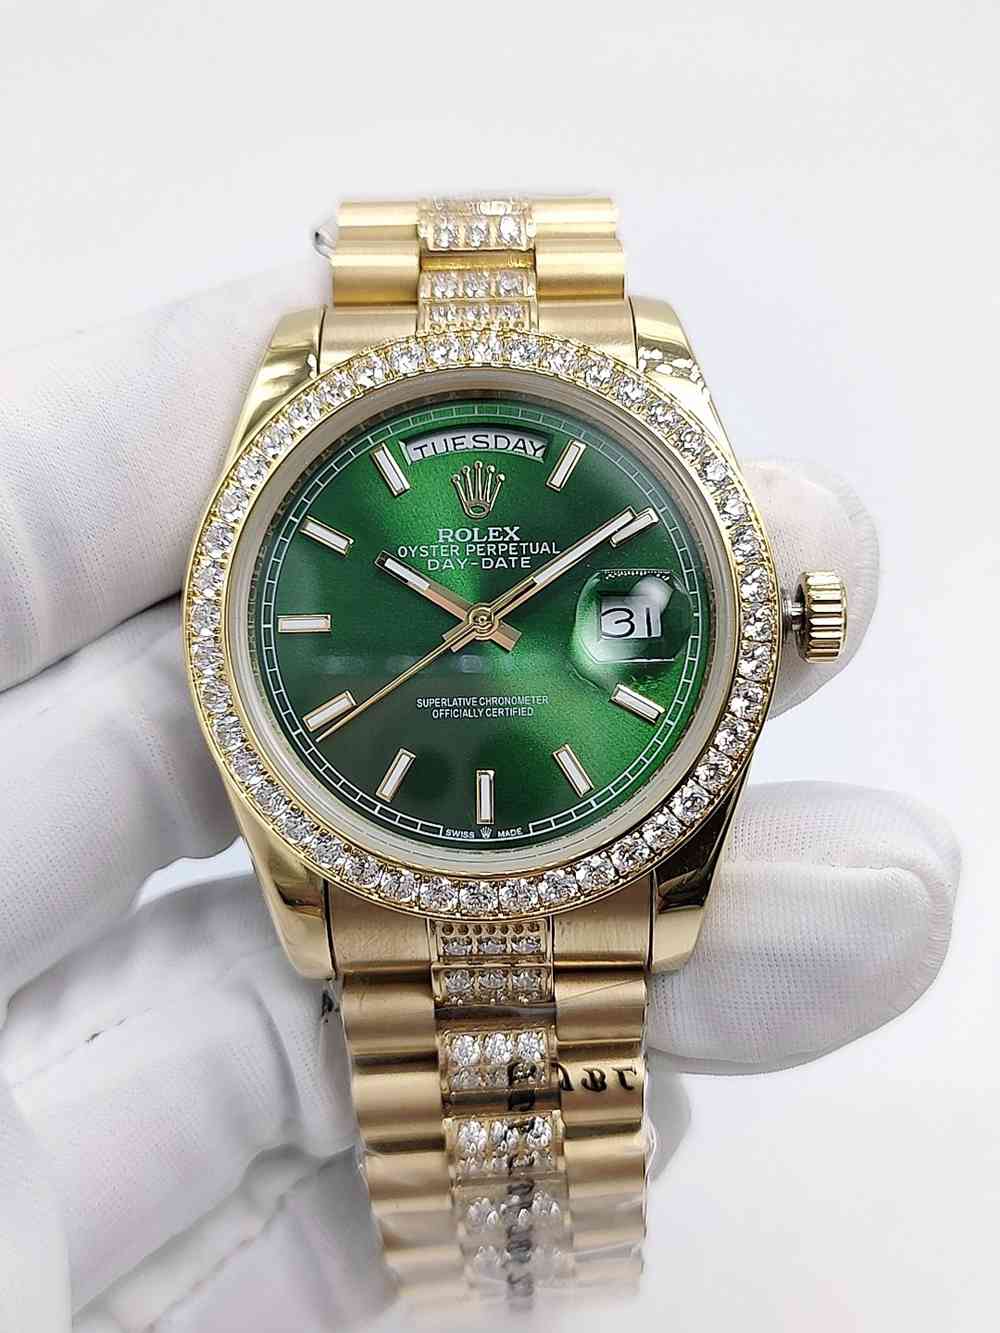 DayDate 36mm gold case diamonds president bracelets gold/white/black/green dials AAA automatic 2813 S040